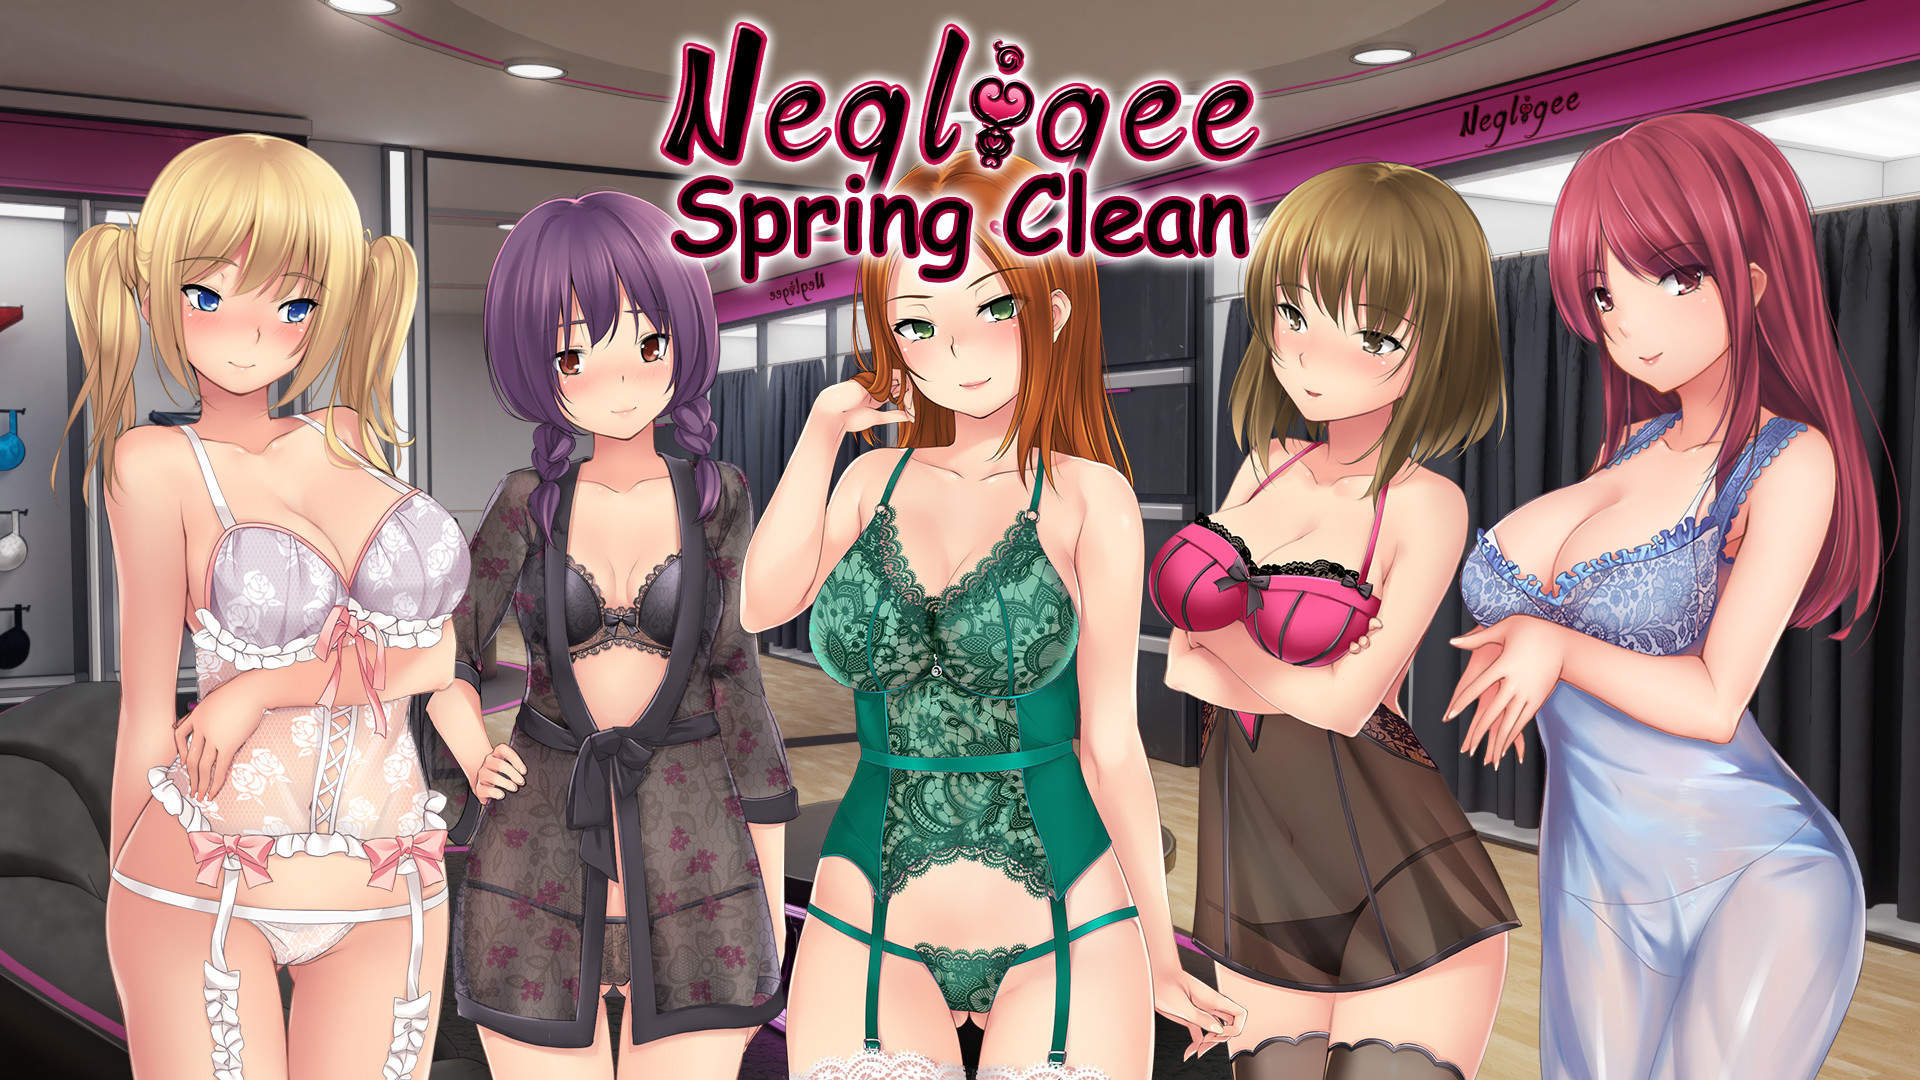 Negligee Sex - Negligee: Spring Clean Prelude [DEMO] - free game download, reviews, mega -  xGames